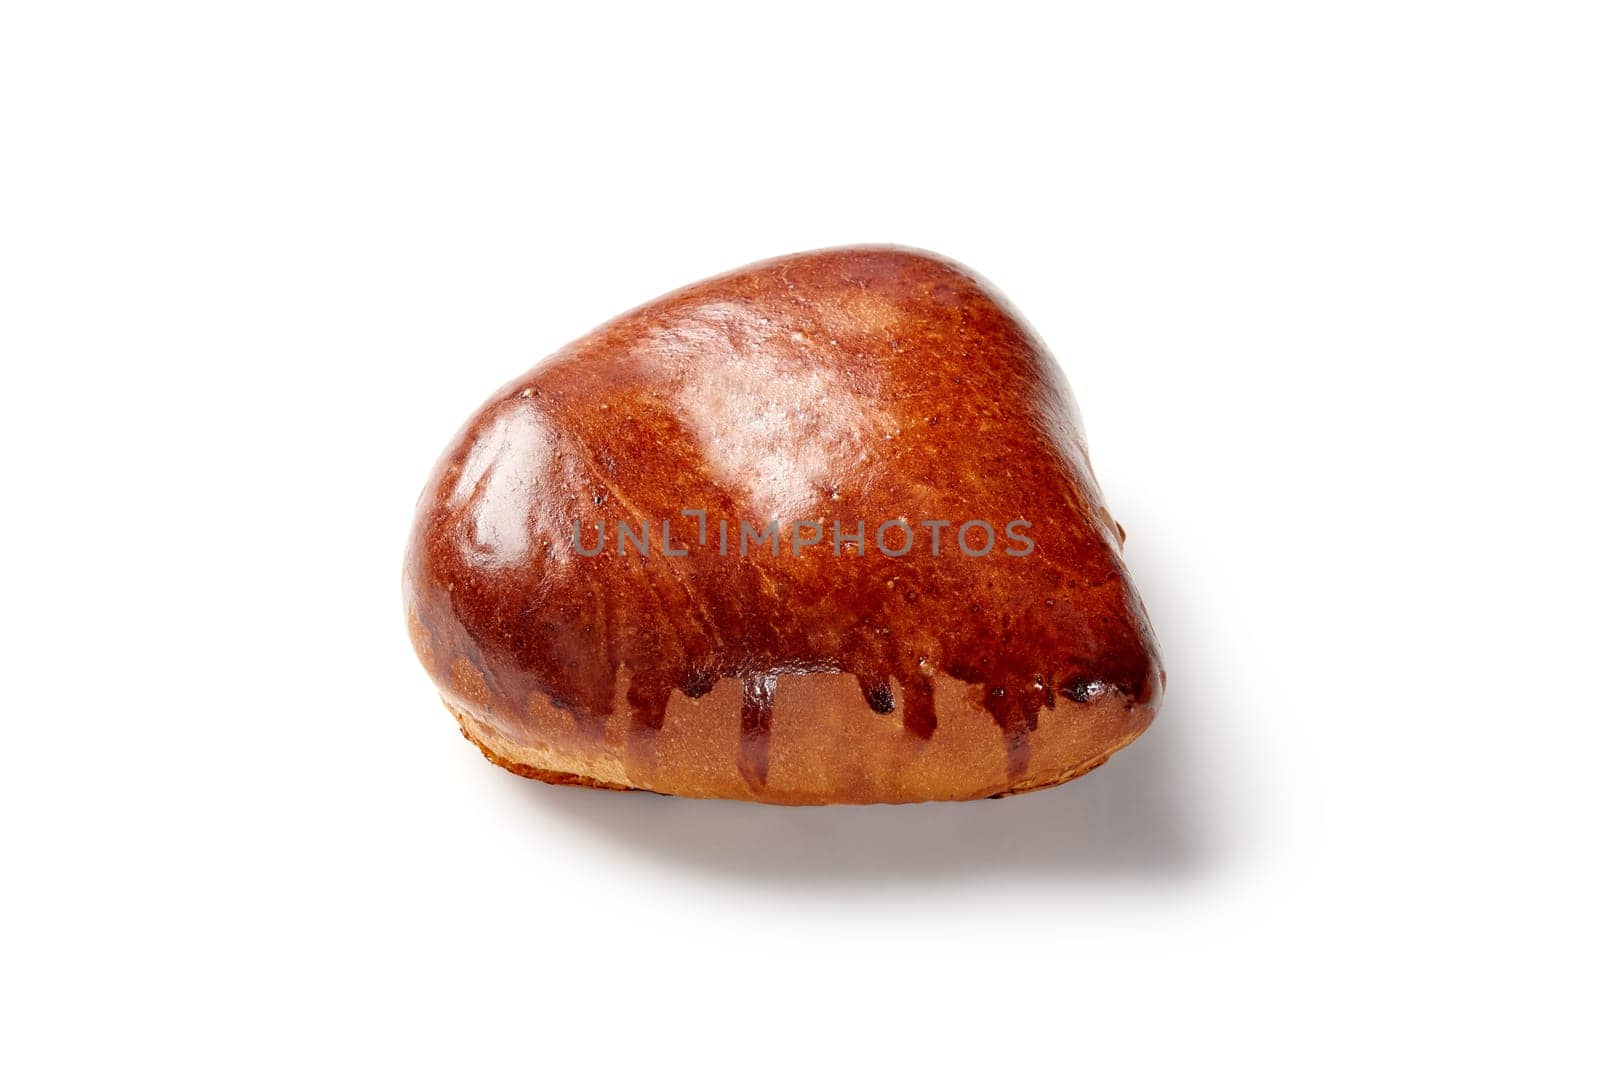 Shiny glazed pastry bun with sweet or savory filling presented on white background, ideal for snack or breakfast